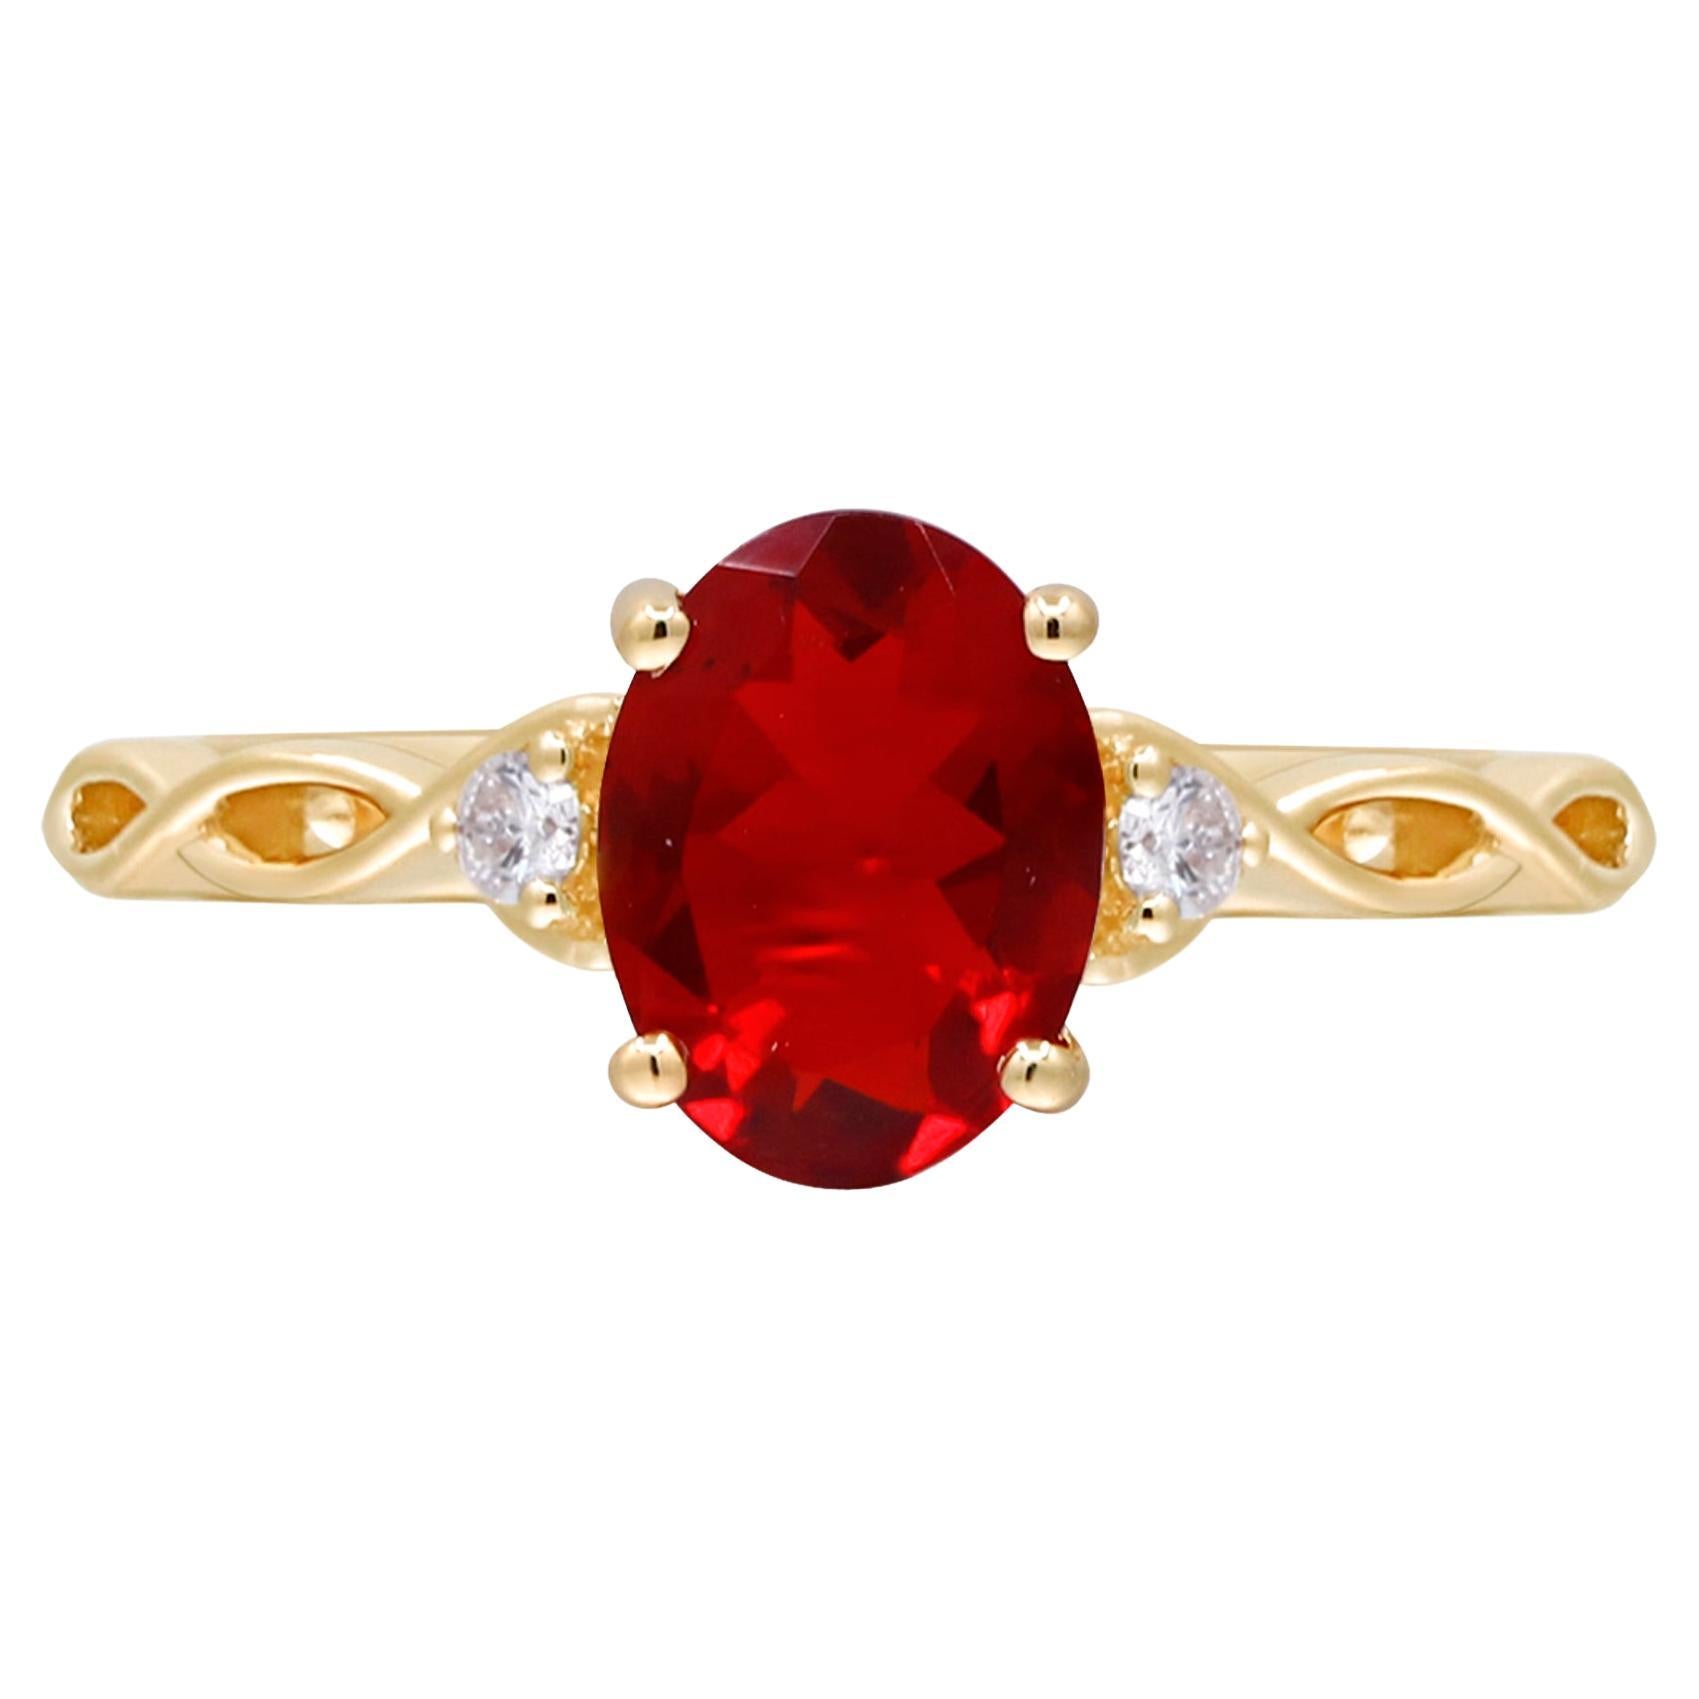 0.85 Carat Oval-Cut Fire Opal with Diamond Accents 14K Yellow Gold Ring